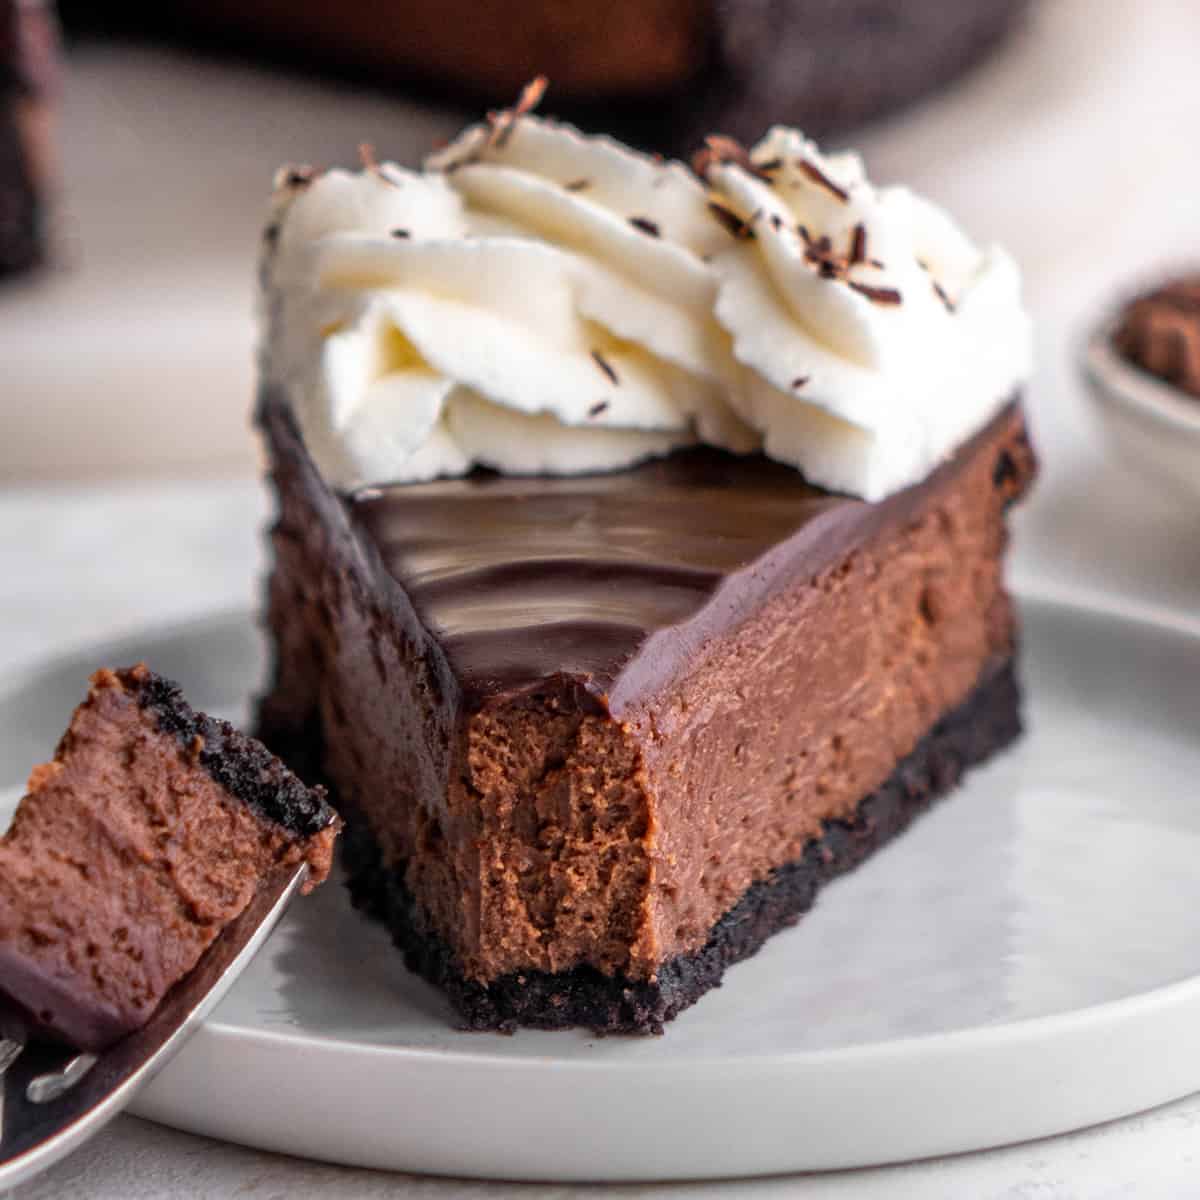 a slice of Chocolate Cheesecake on a plate with whipped cream on top and a bite taken out of it